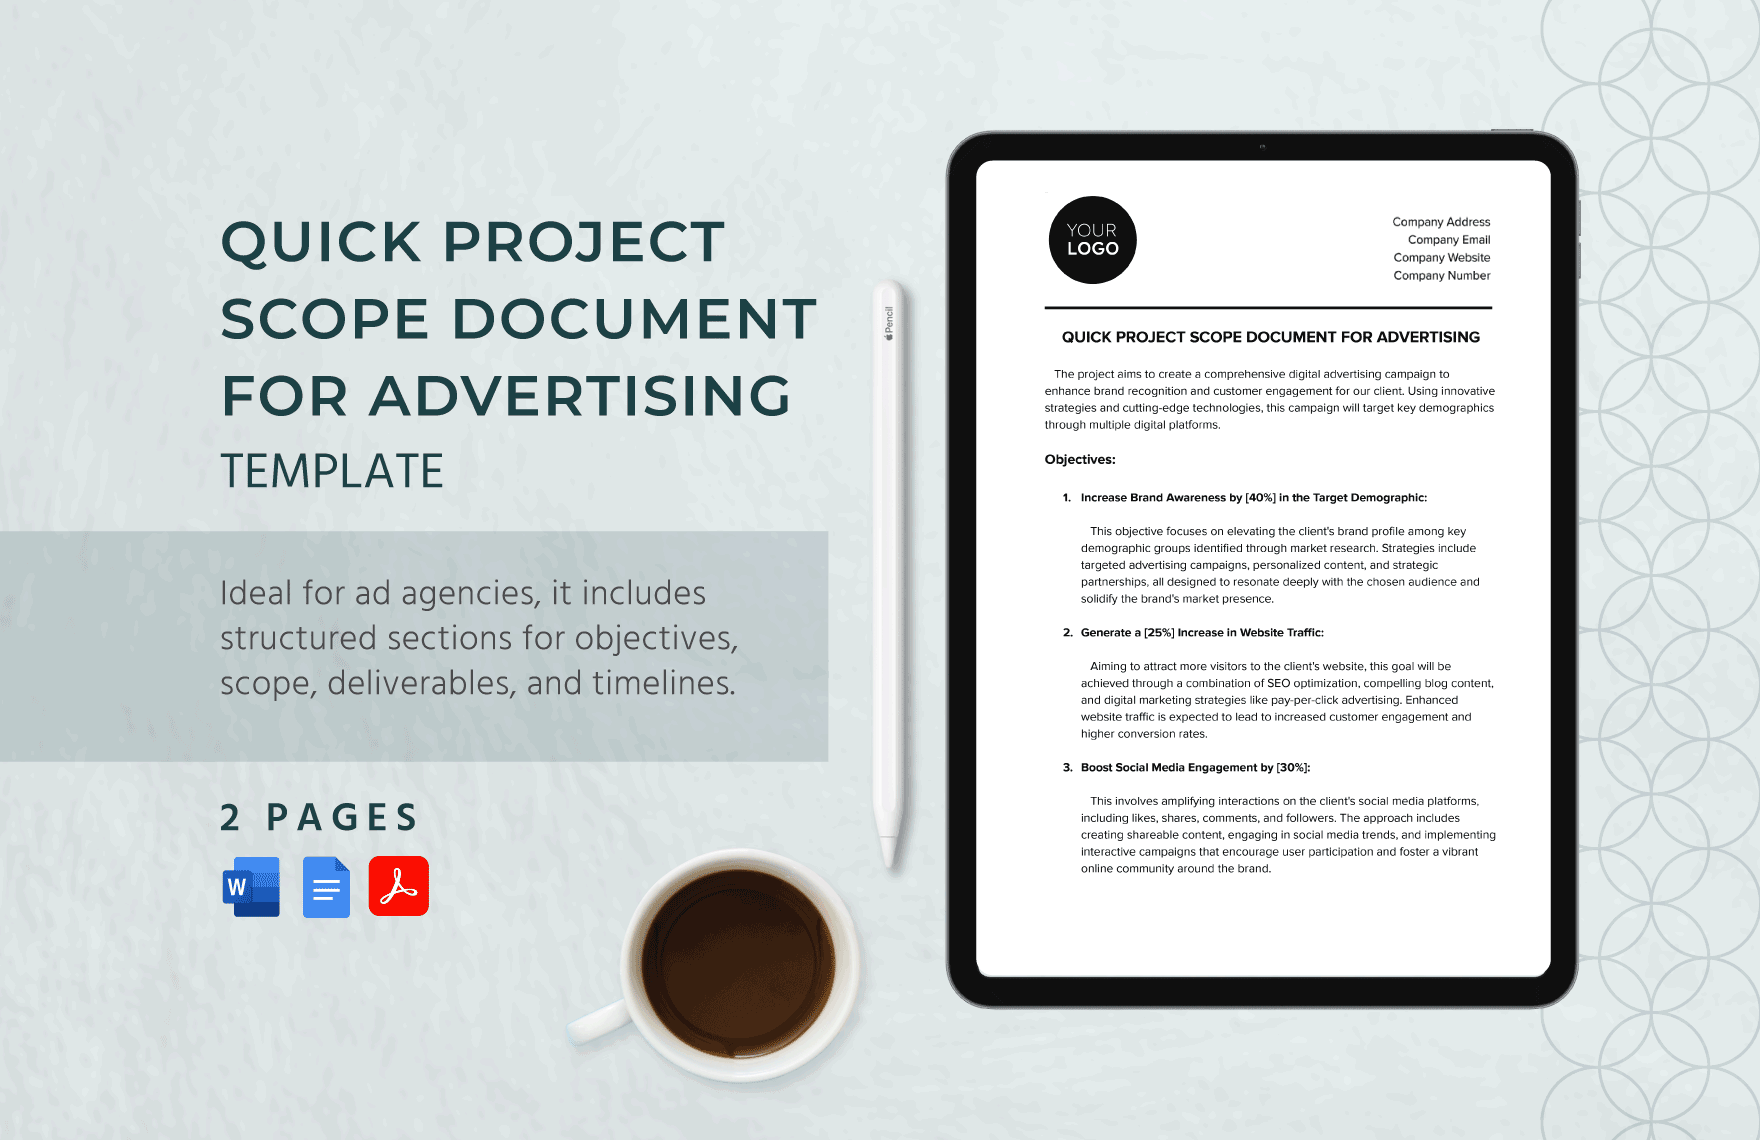 Quick Project Scope Document for Advertising Template in Word, Google Docs, PDF